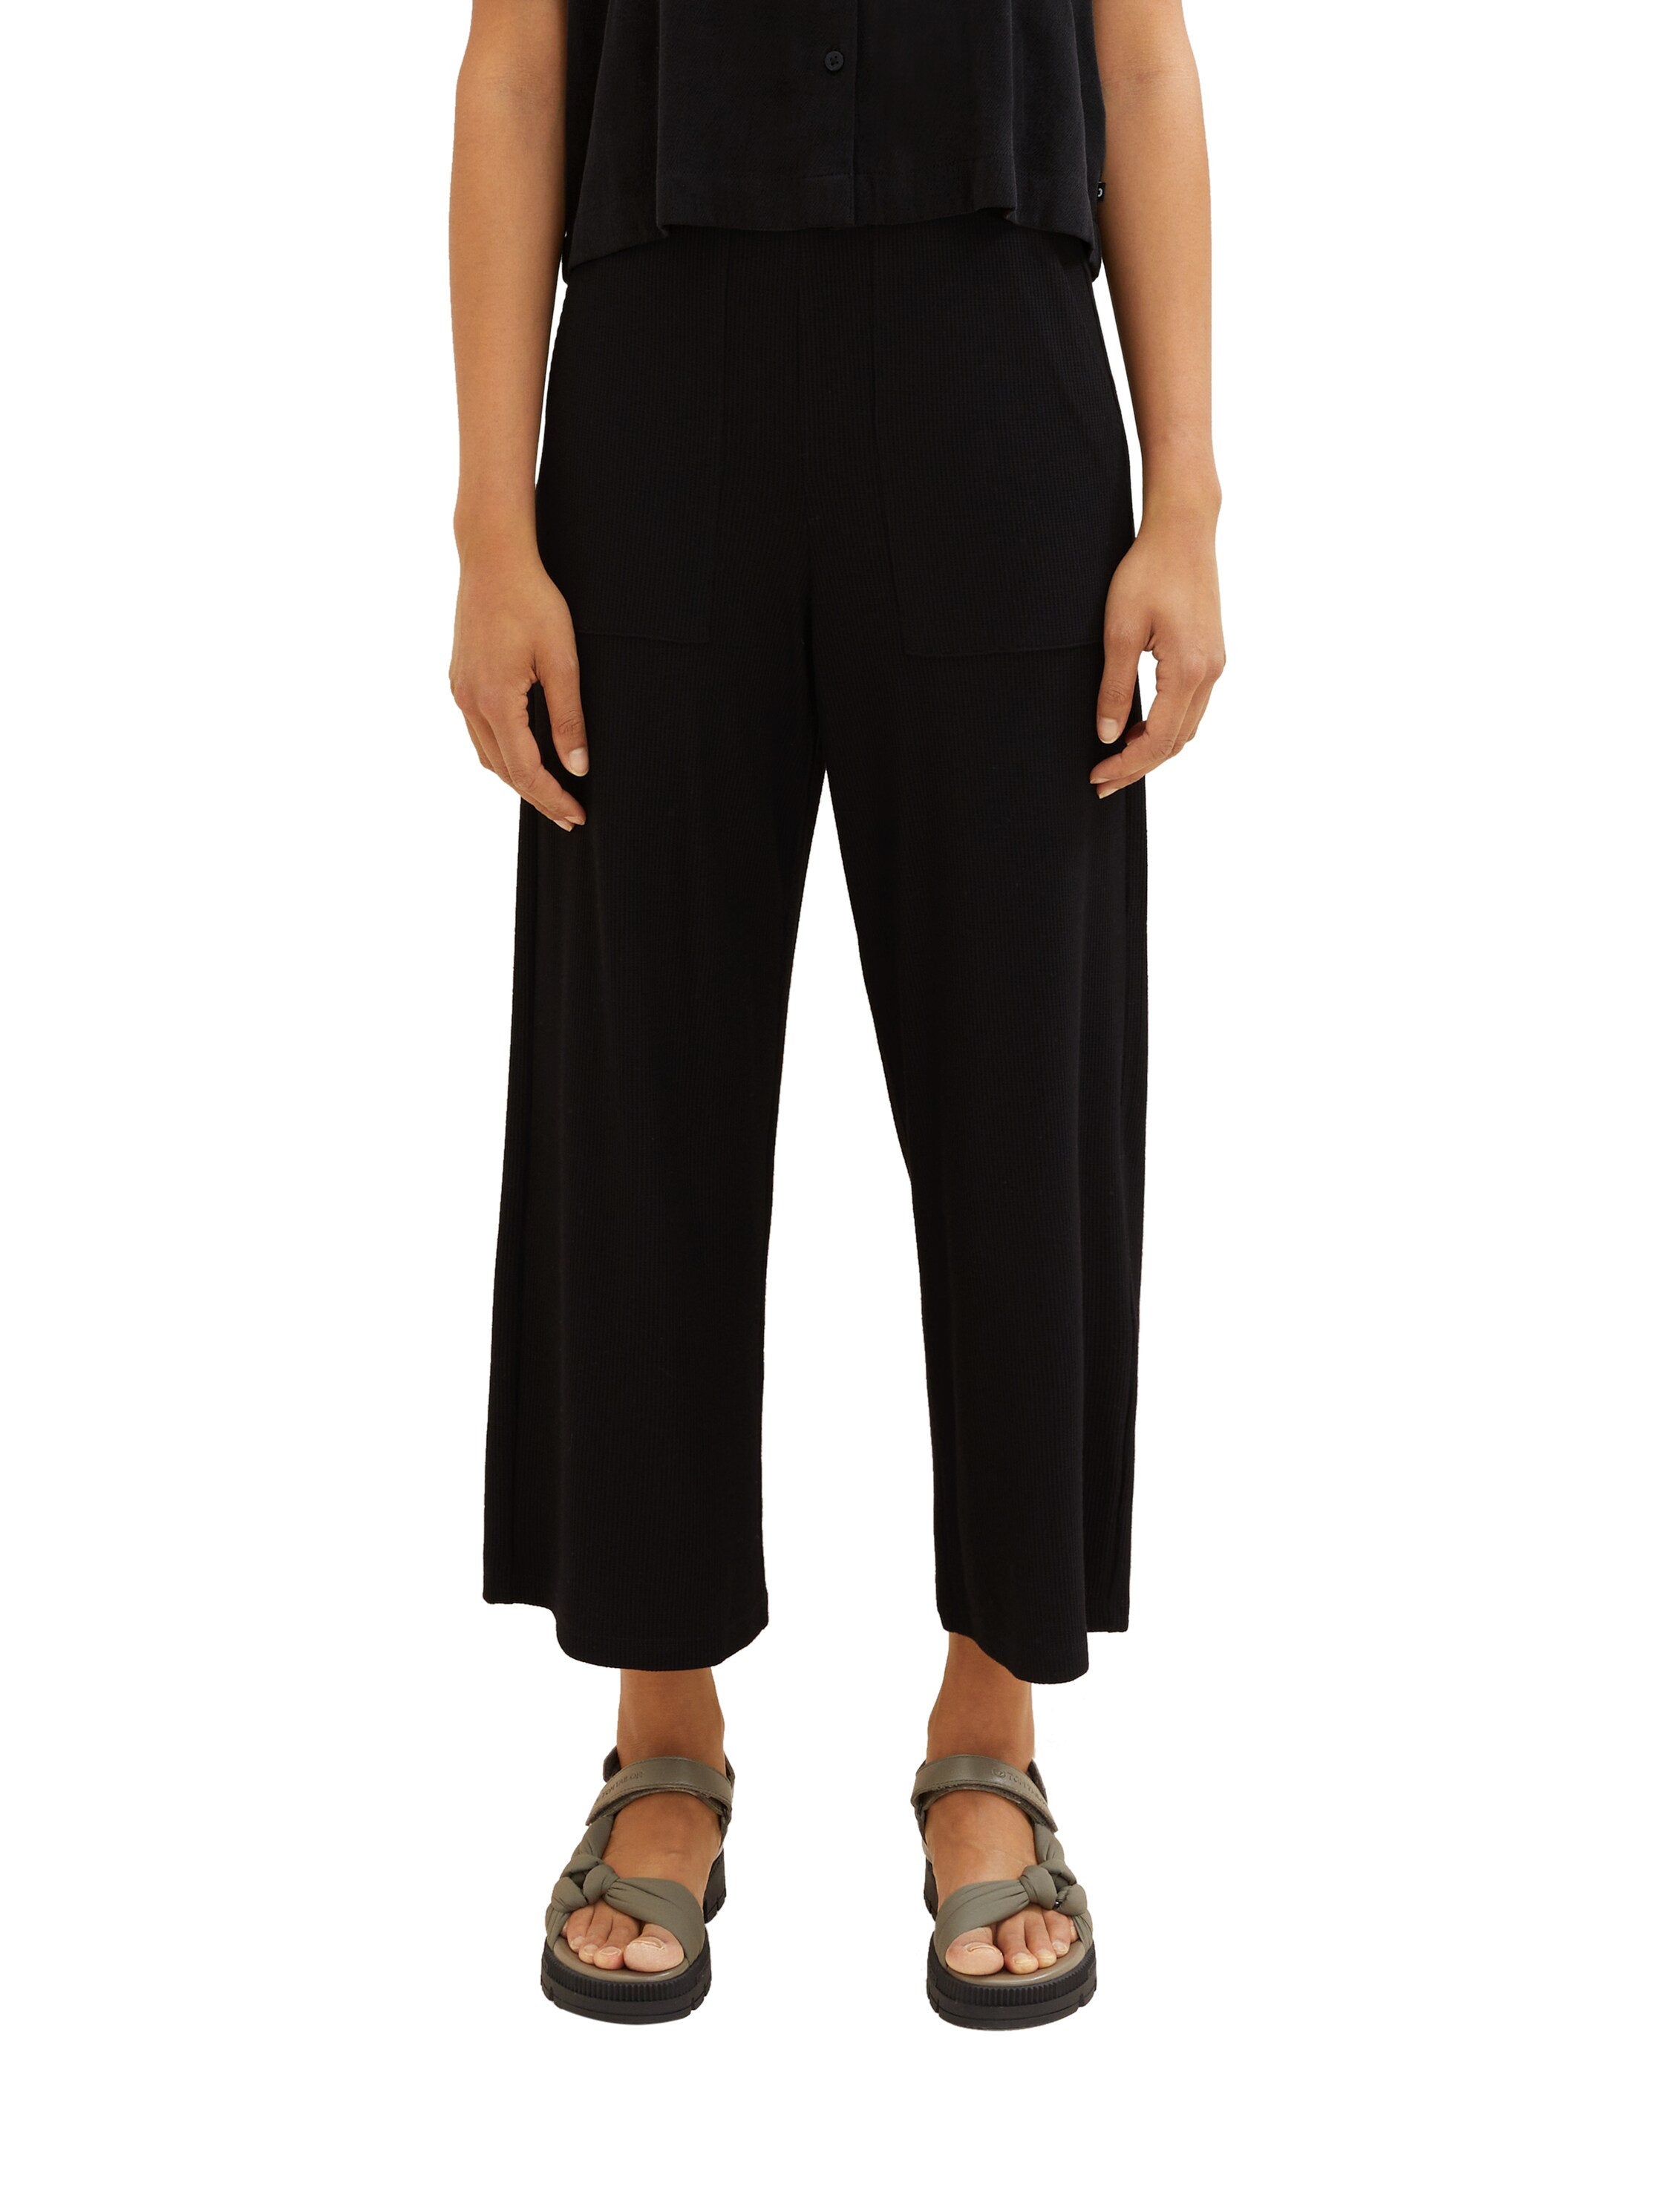 Cropped Slip On Trousers With Pockets_1038220_14482_02